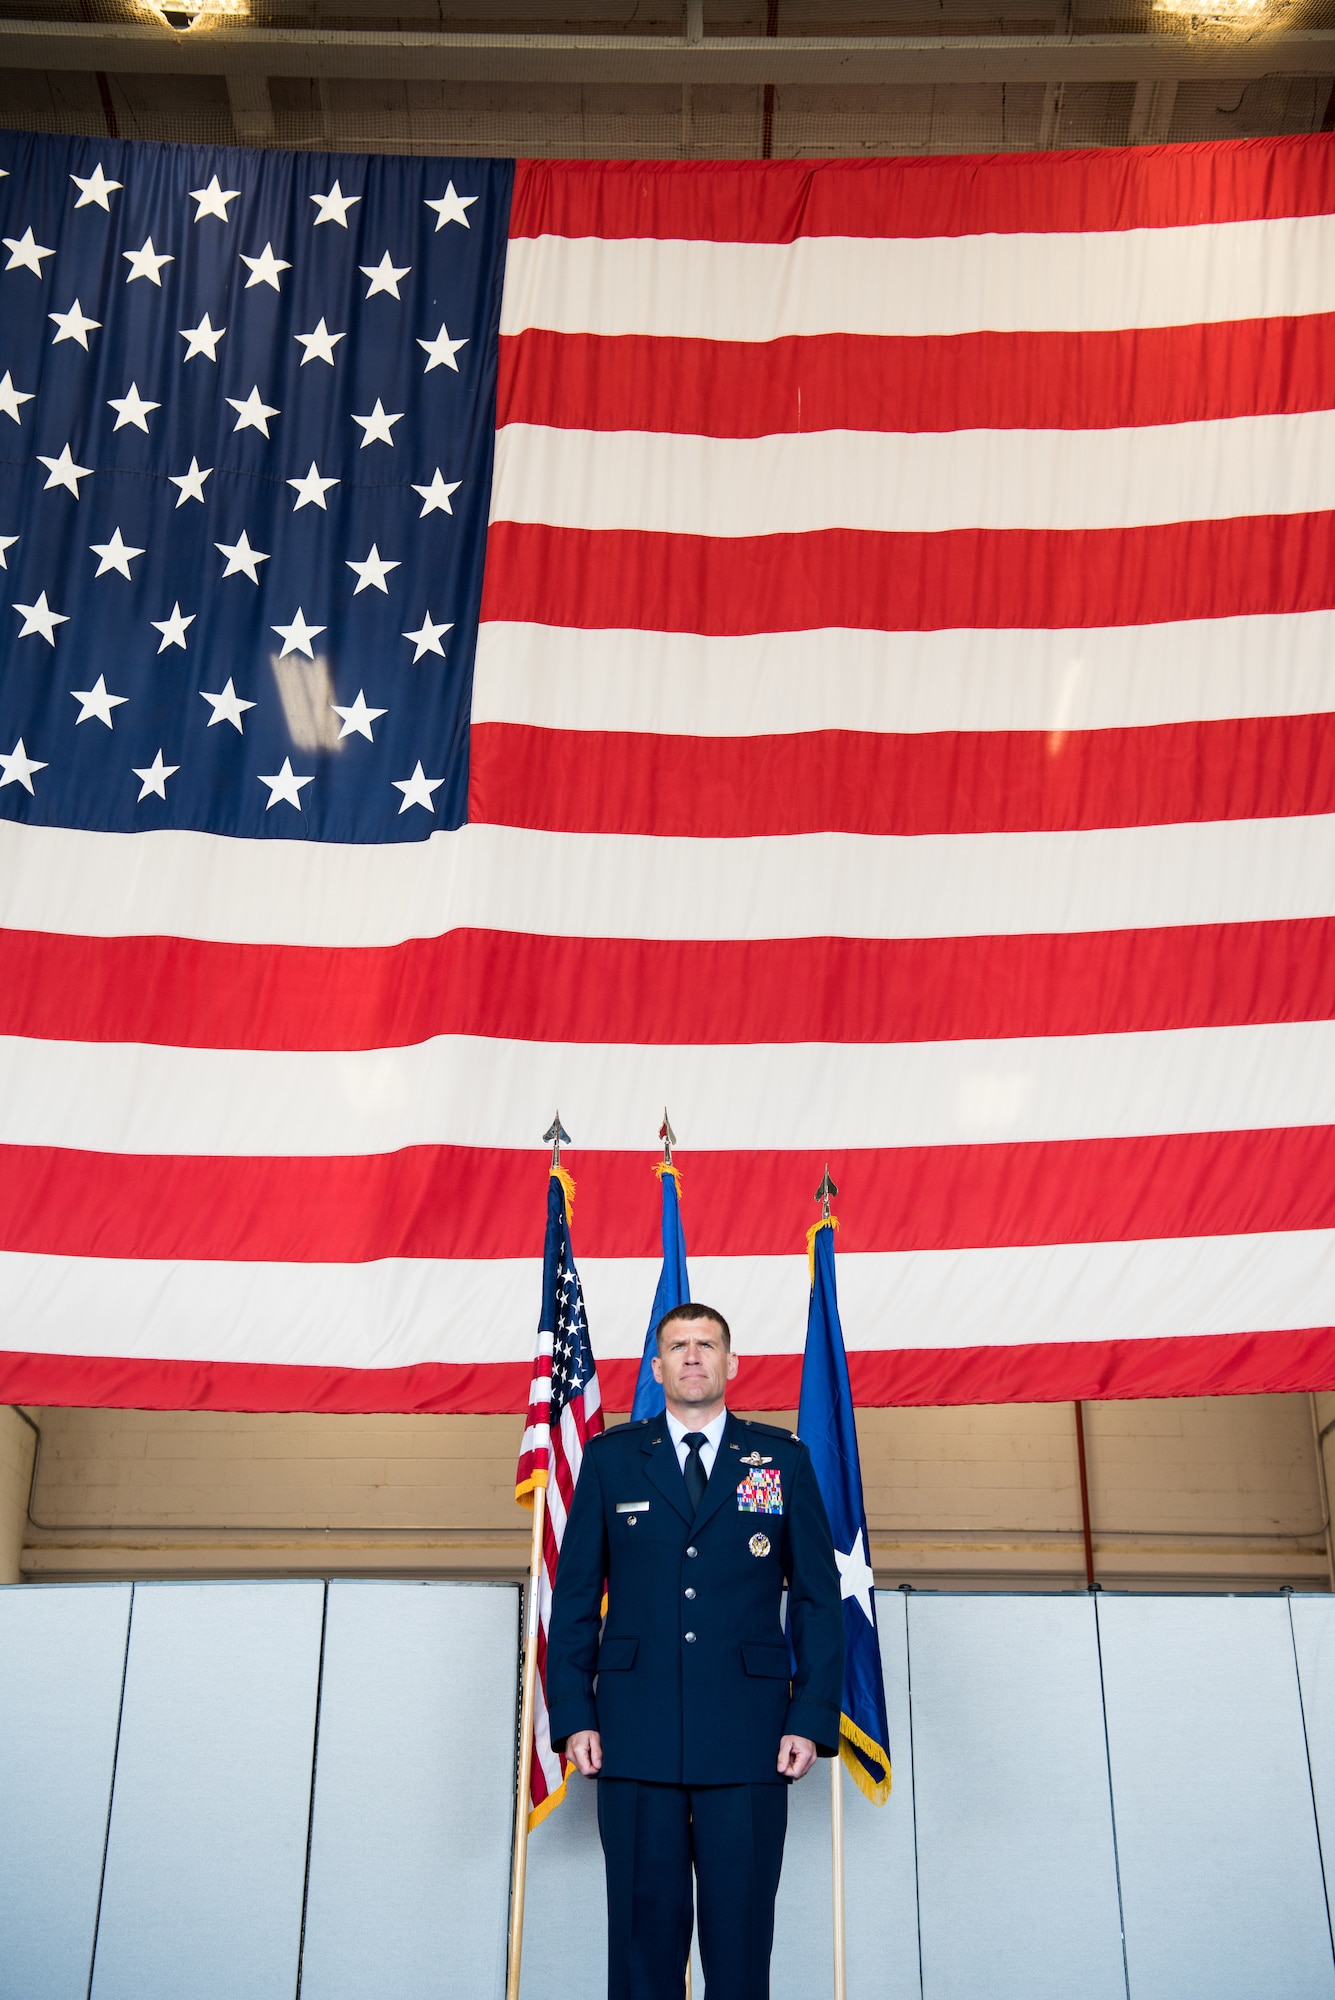 Col. Andrew Clark, 9th Reconnaissance Wing commander, stands at attention awaiting his first salute as the new commander of the 9th RW Beale Air Force Base, California, April 13, 2018. The 9th RW is the only intelligence, surveillance and reconnaissance wing in the Department of Defense.